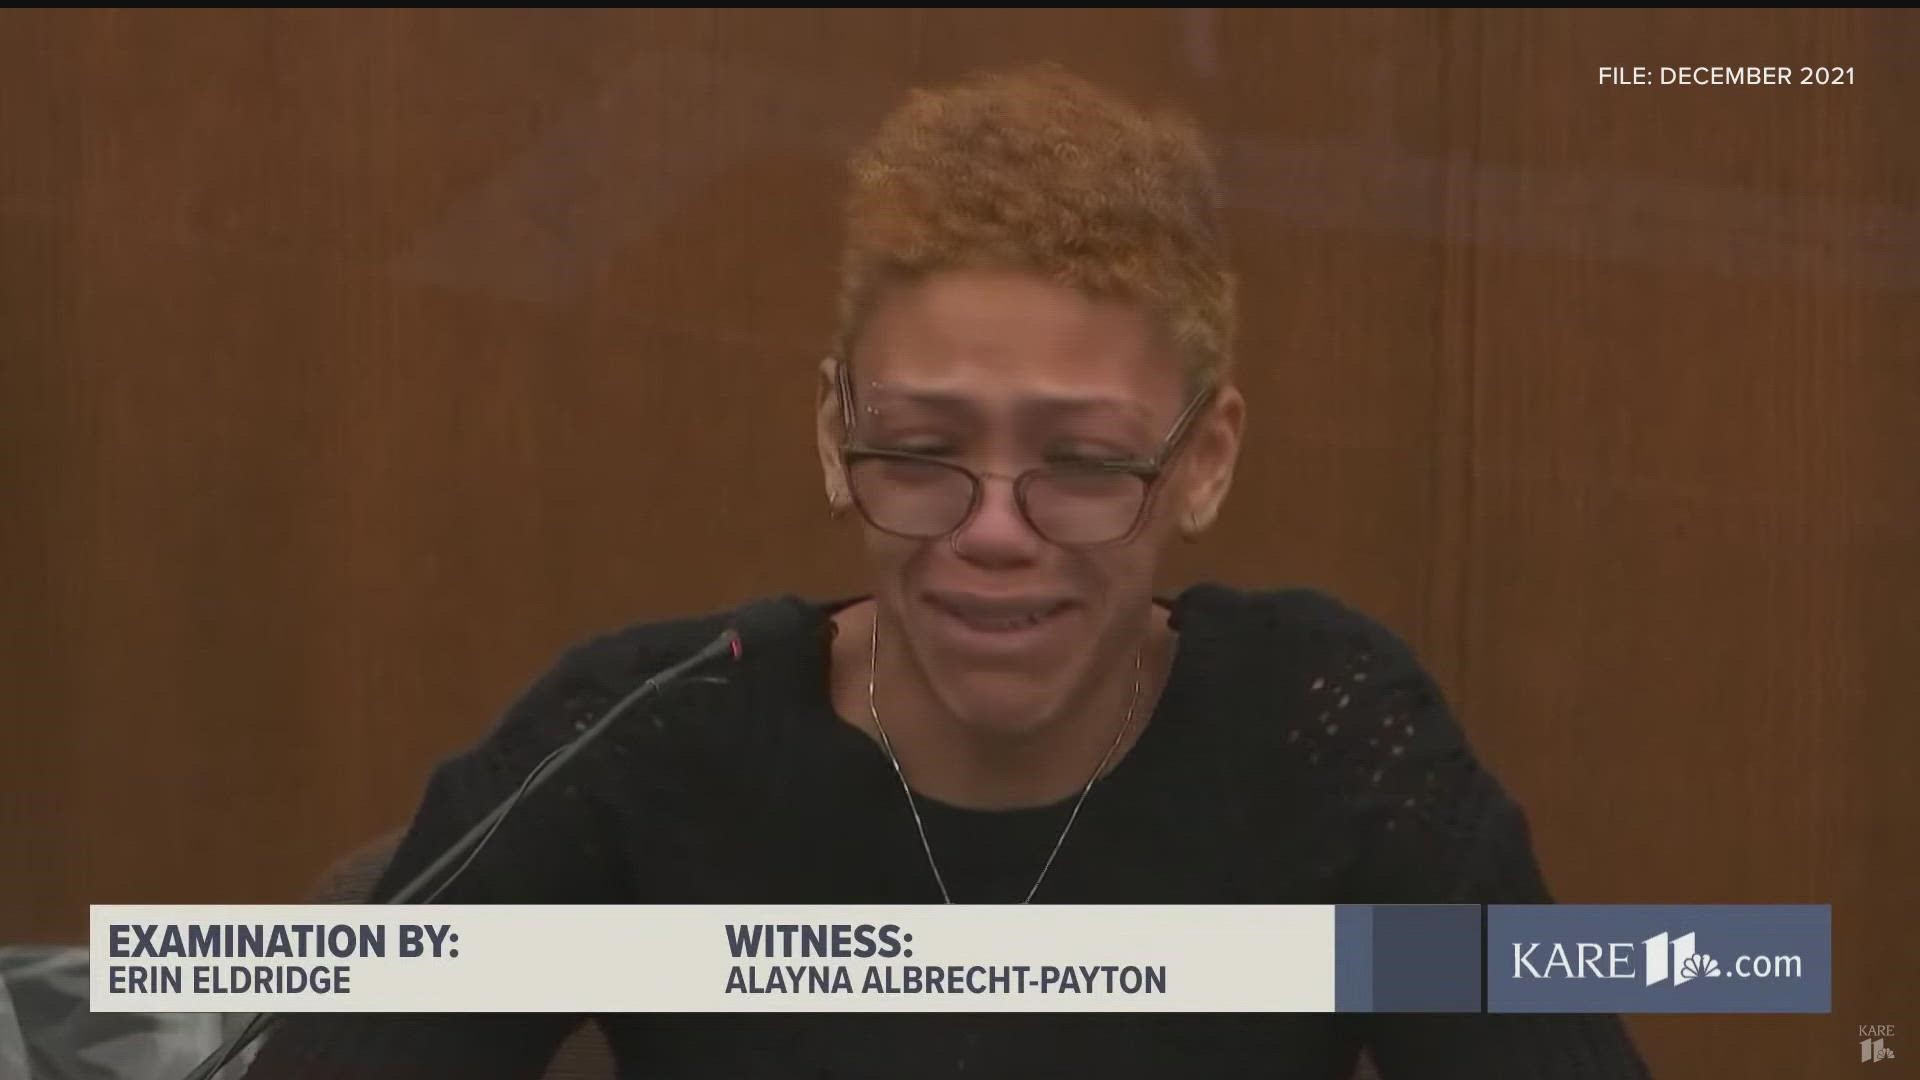 In the lawsuit, Alayna Beth Albrecht-Payton says she suffered significant injuries and deals with continuing PTSD as a result of the fatal shooting.